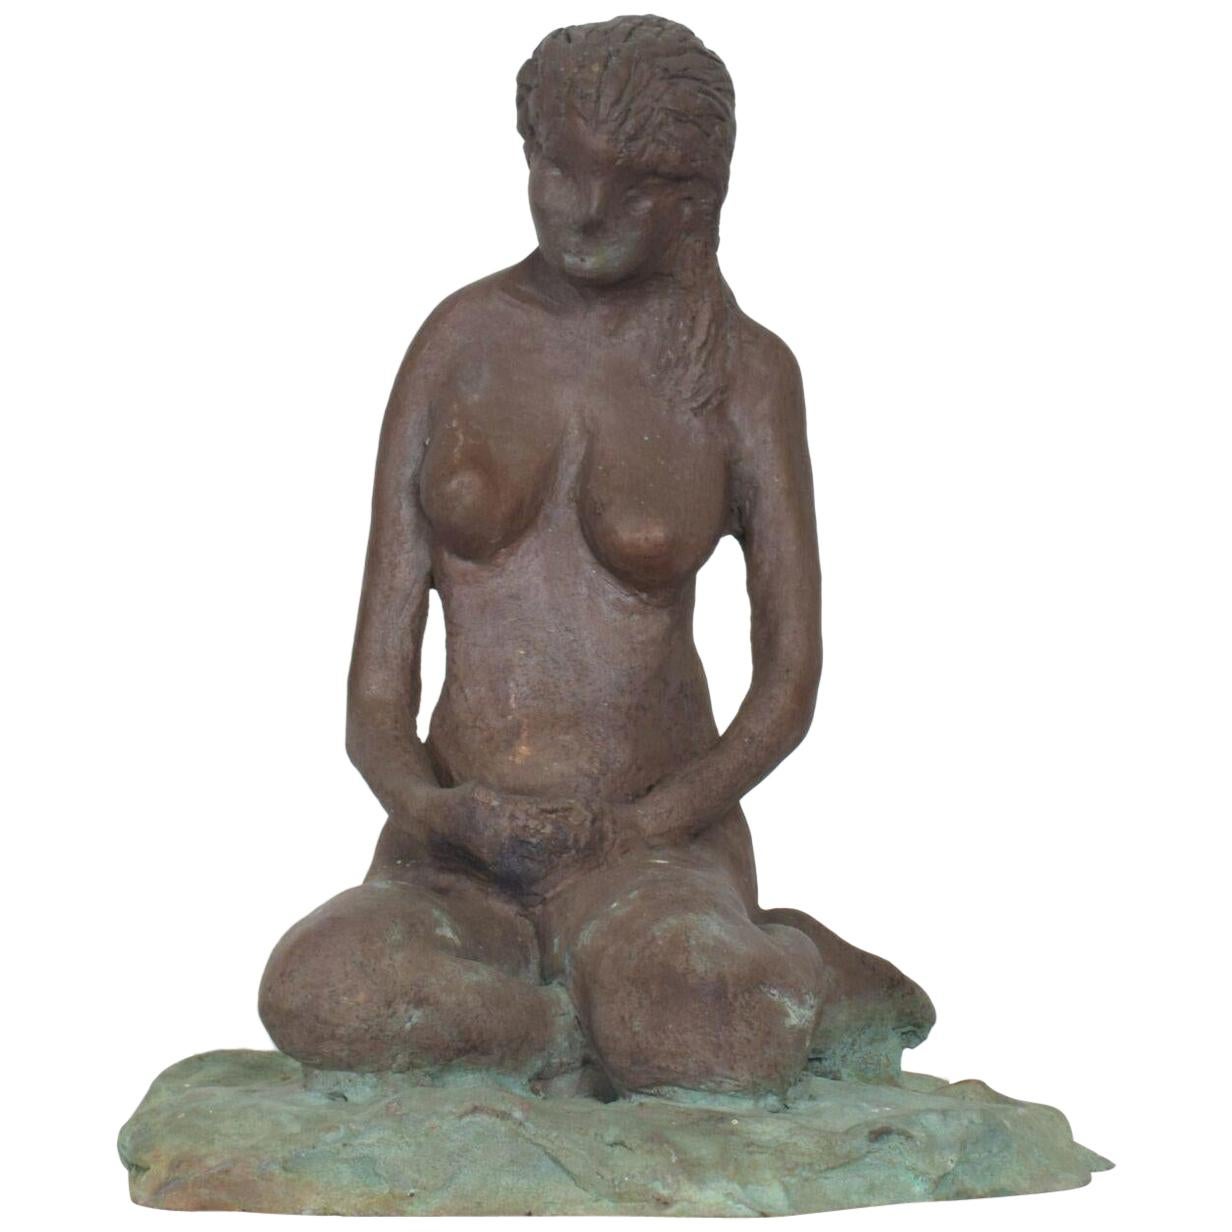 Sculpture
1970s Sitting nude female sculpture cast in bronze, manner and style sculptor Francisco Zuniga.
Signed and unable to read.
Dimensions: 8.5 H x 8D x 7.5 W
In original preowned vintage condition. 
Refer to images.